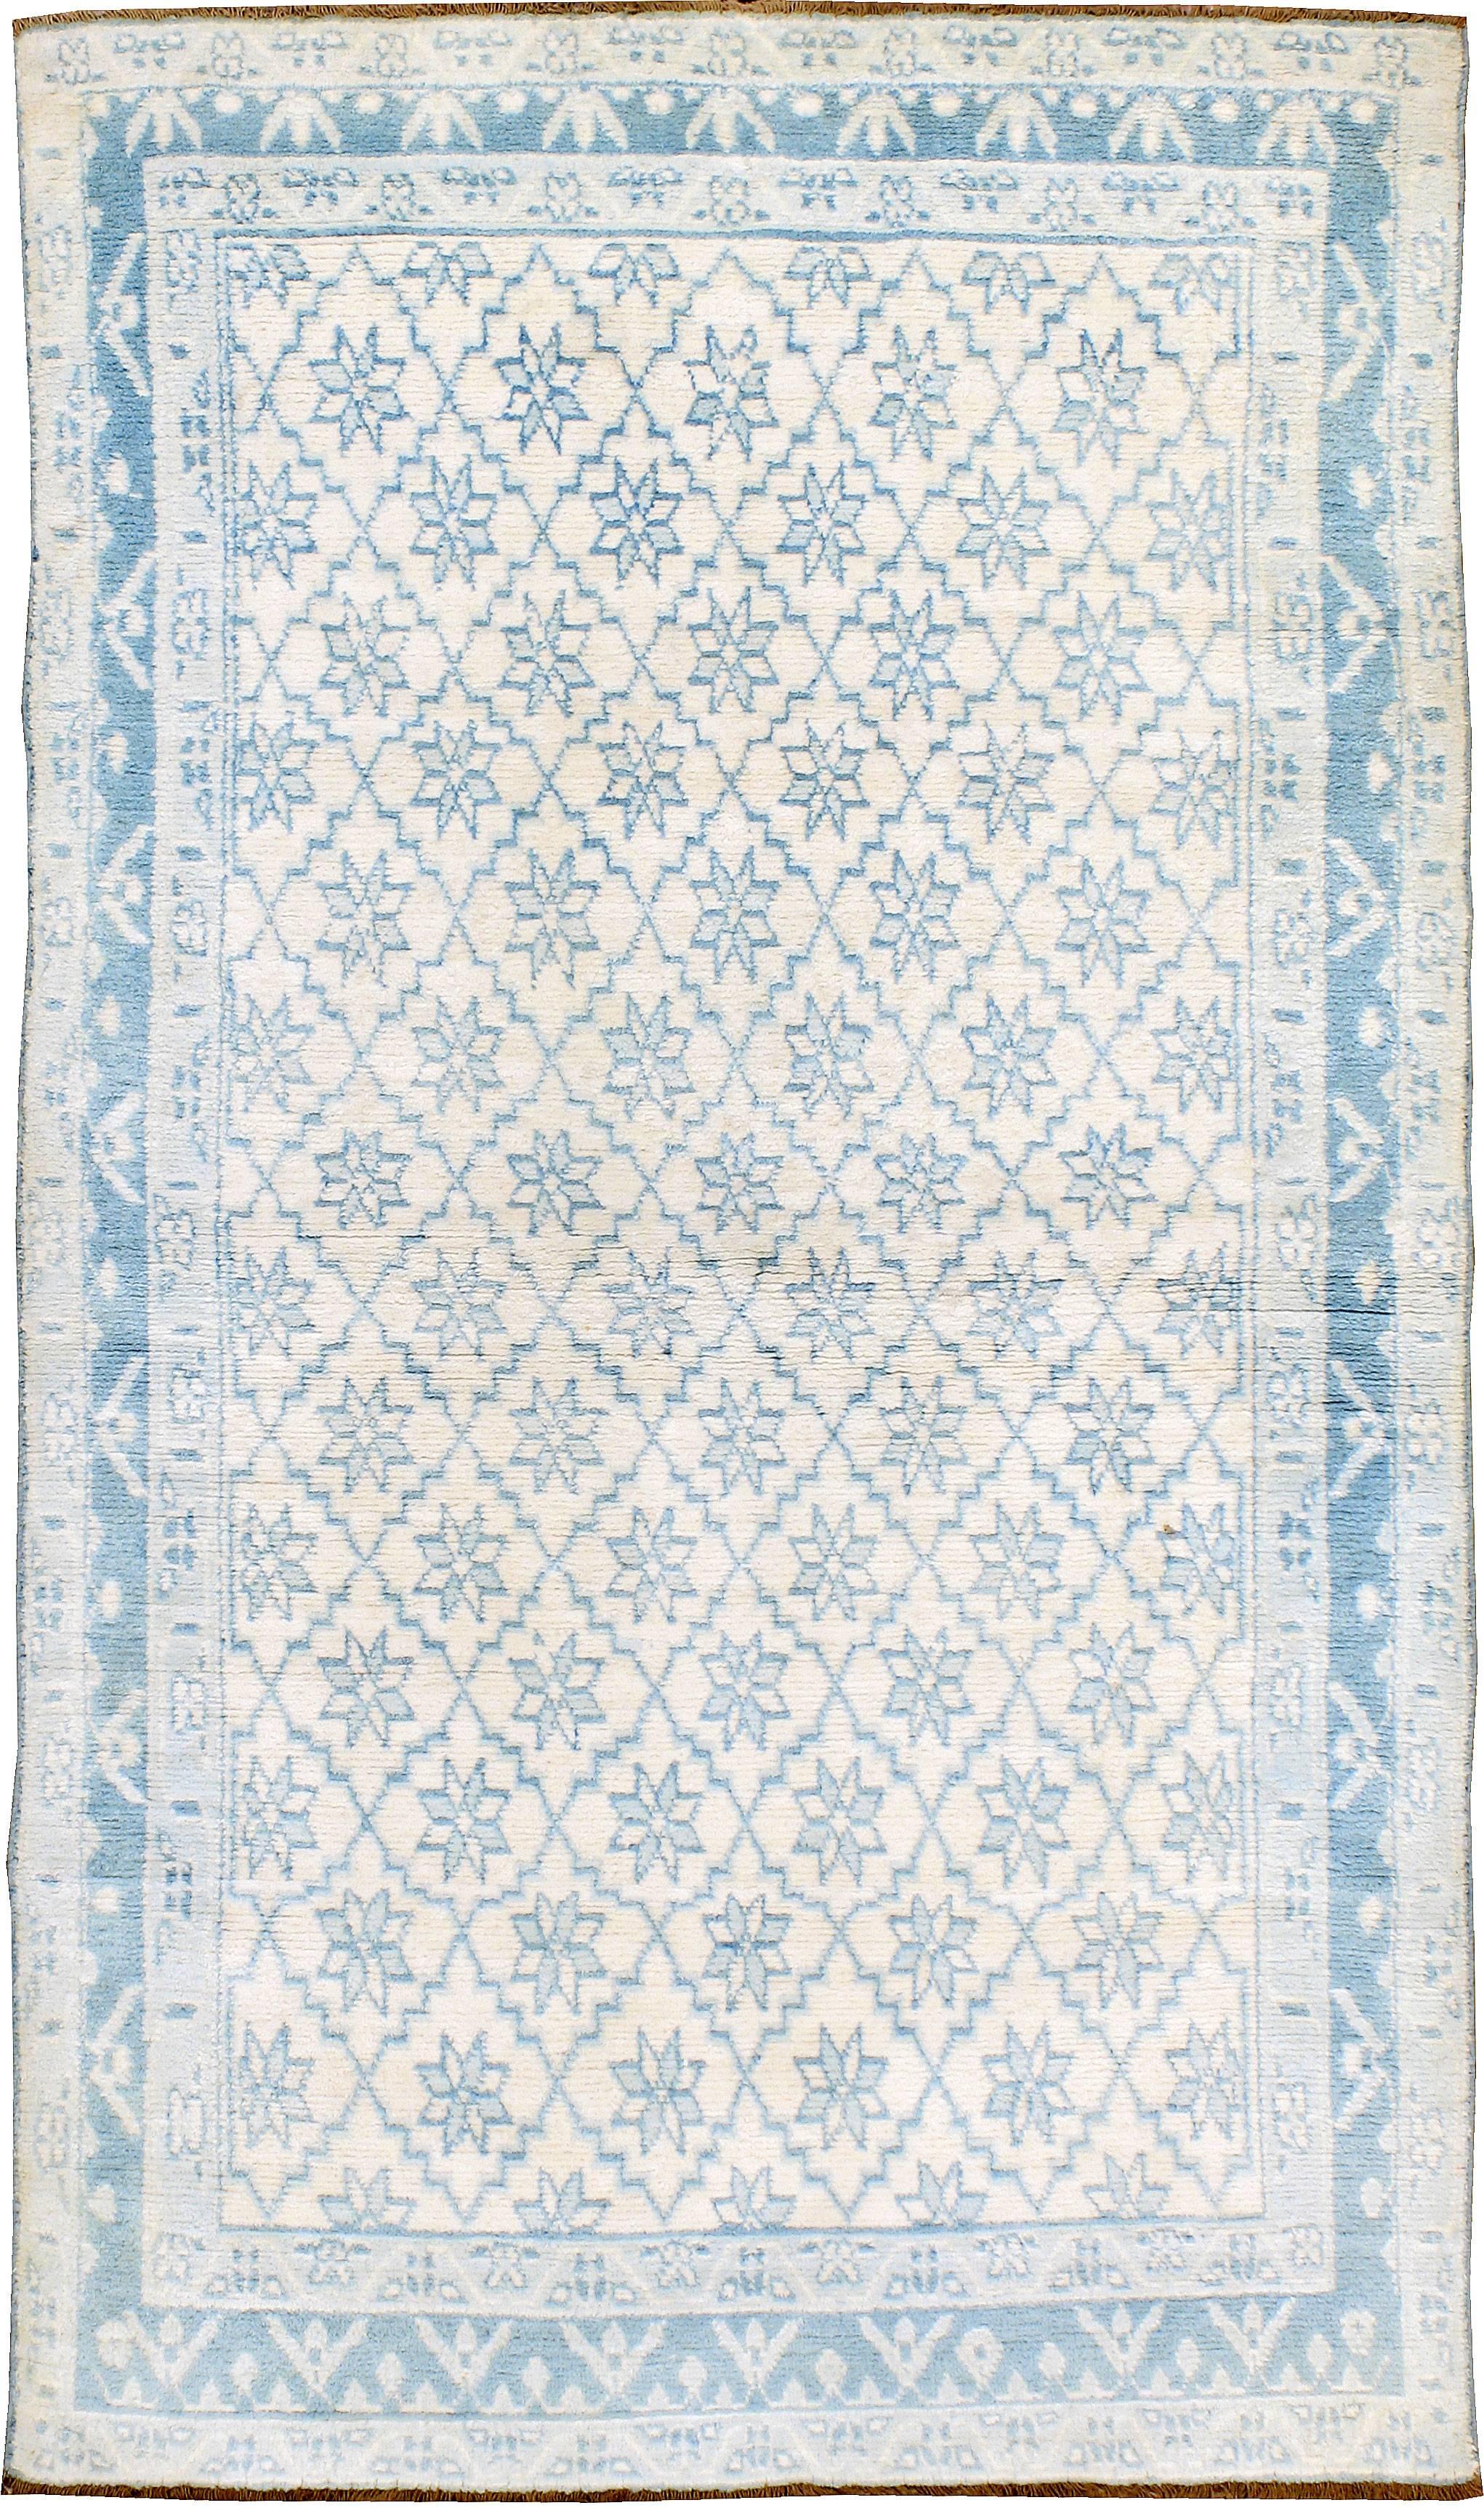 A vintage Indian cotton Agra carpet from the second quarter of the 20th century with a repeating flower design within an all-over diamond pattern.